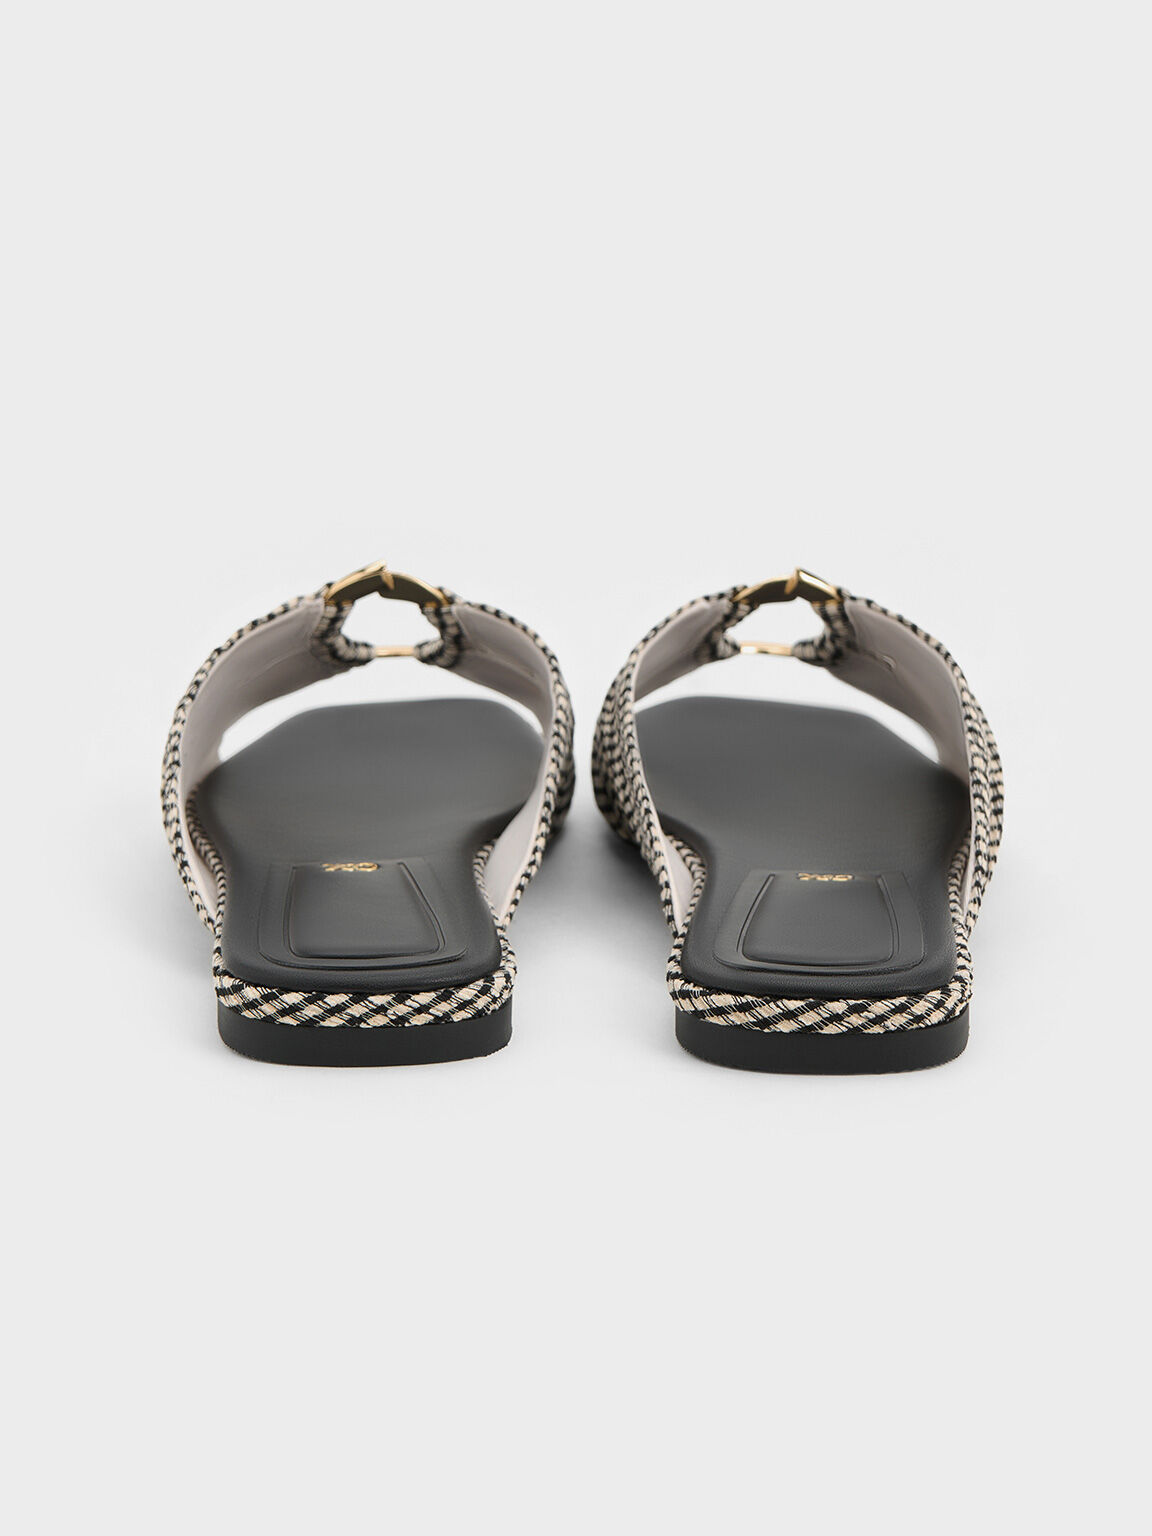 Checkered Ruched Oval-Accent Slide Sandals, Multi, hi-res